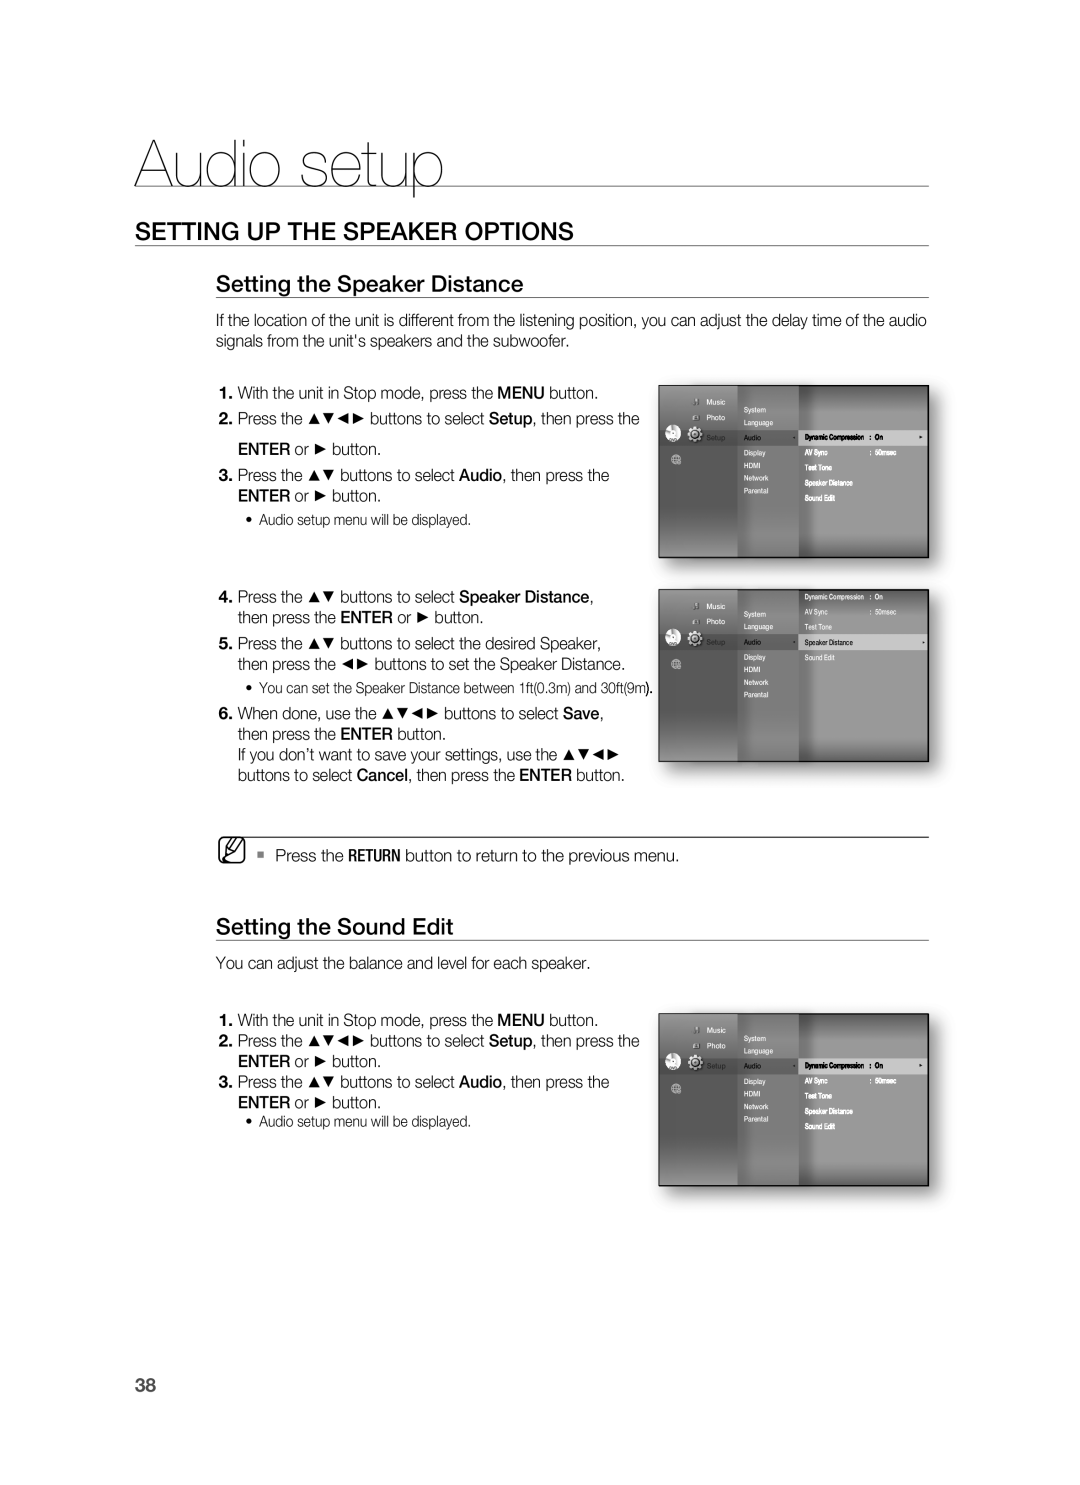 Samsung HT-BD8200 Setting the Speaker Distance, Setting the Sound Edit, Audio setup, Setting Up The Speaker Options 